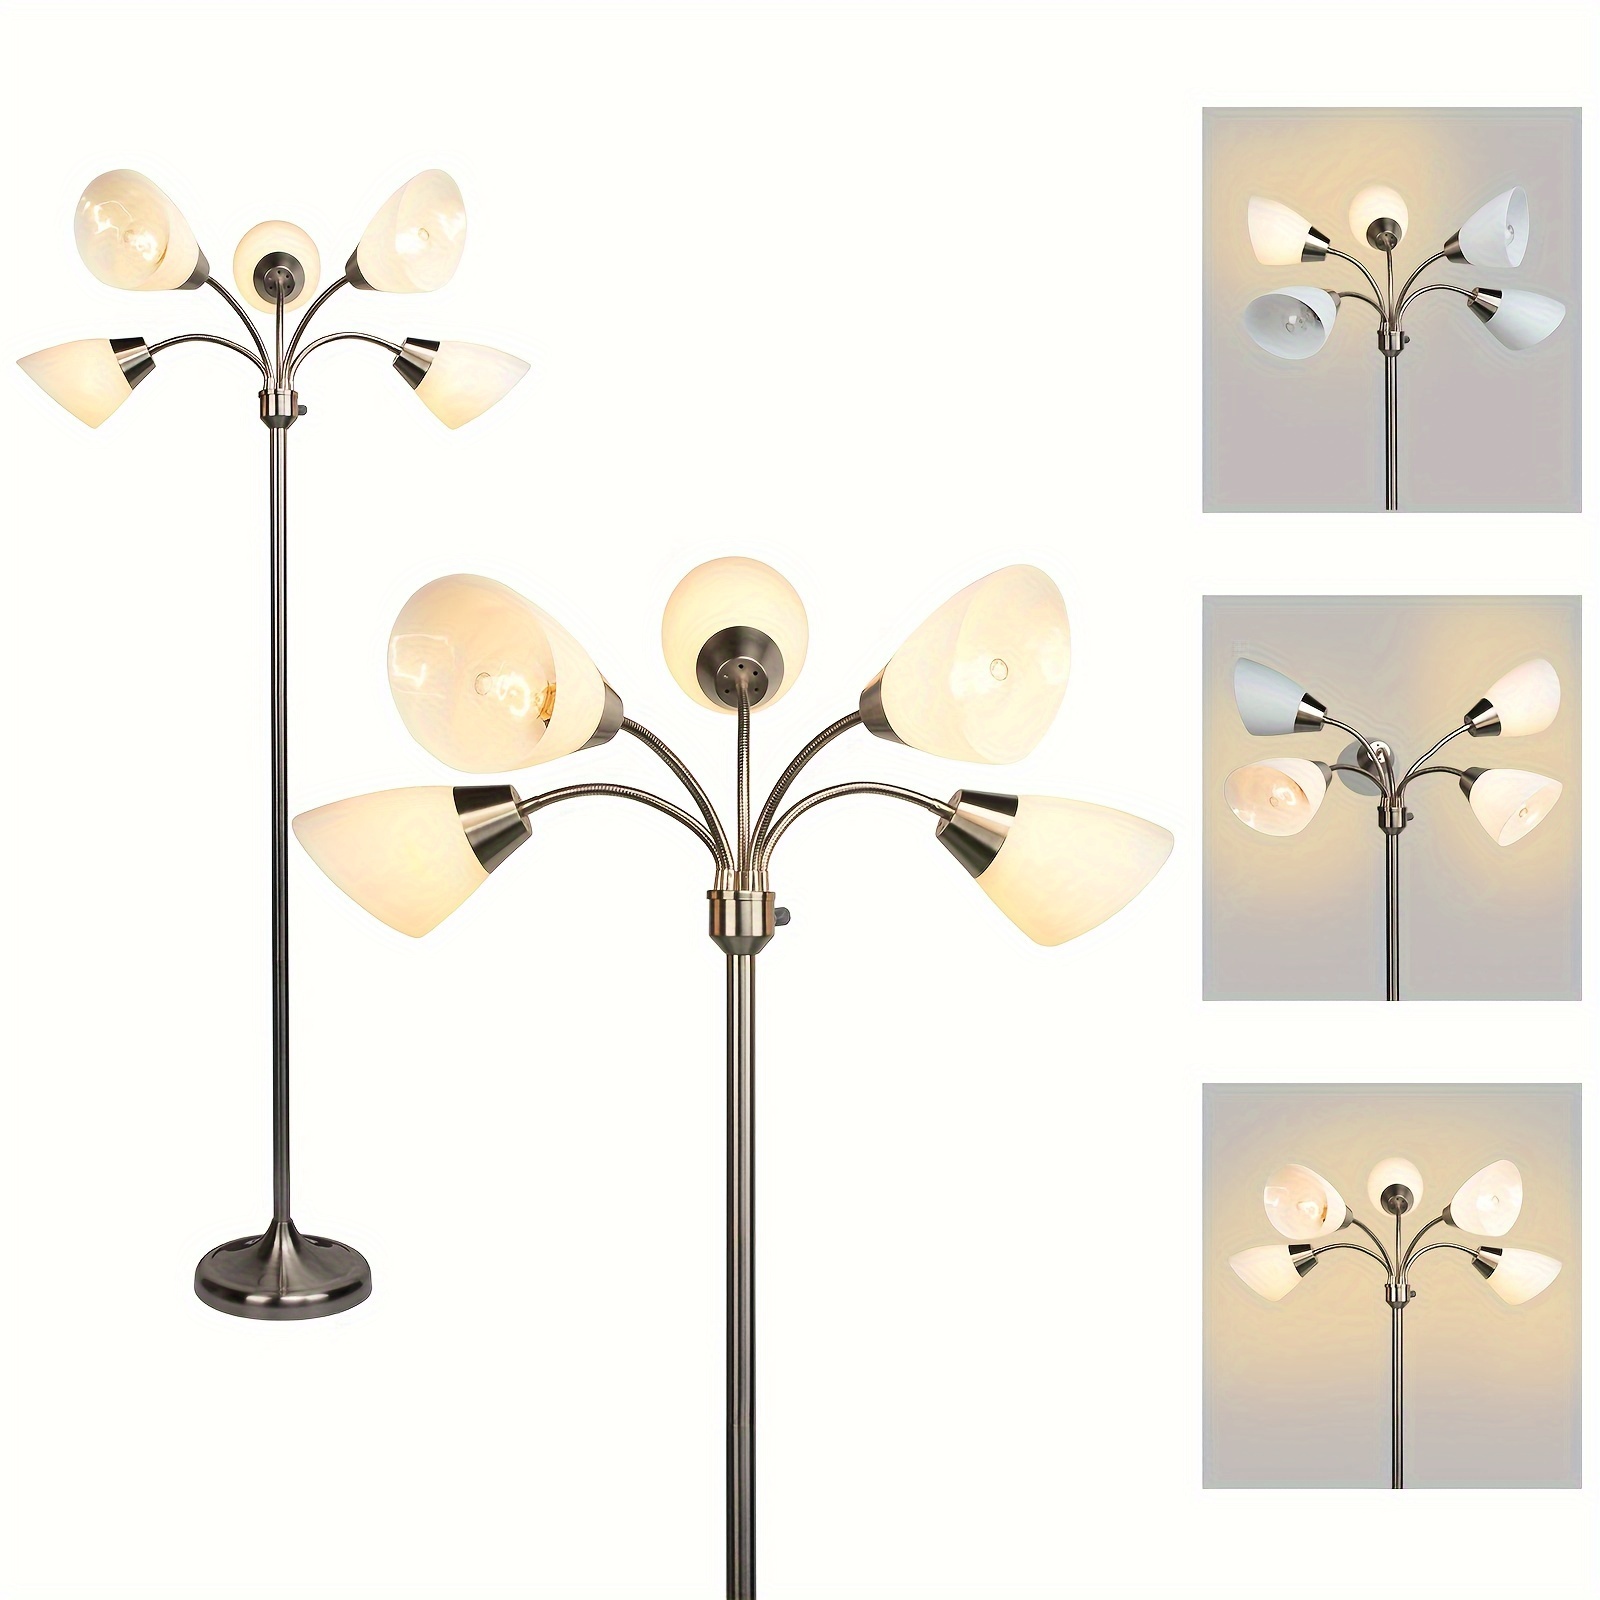 

Modern Reading Floor Lamp Stand Up Lamps With Adjustable Arms 5 Head Pvc Lampshade Sand Nickel Modern Bright Tall Metal Pole Lamps For Bedroom Living Room Corner Study Office